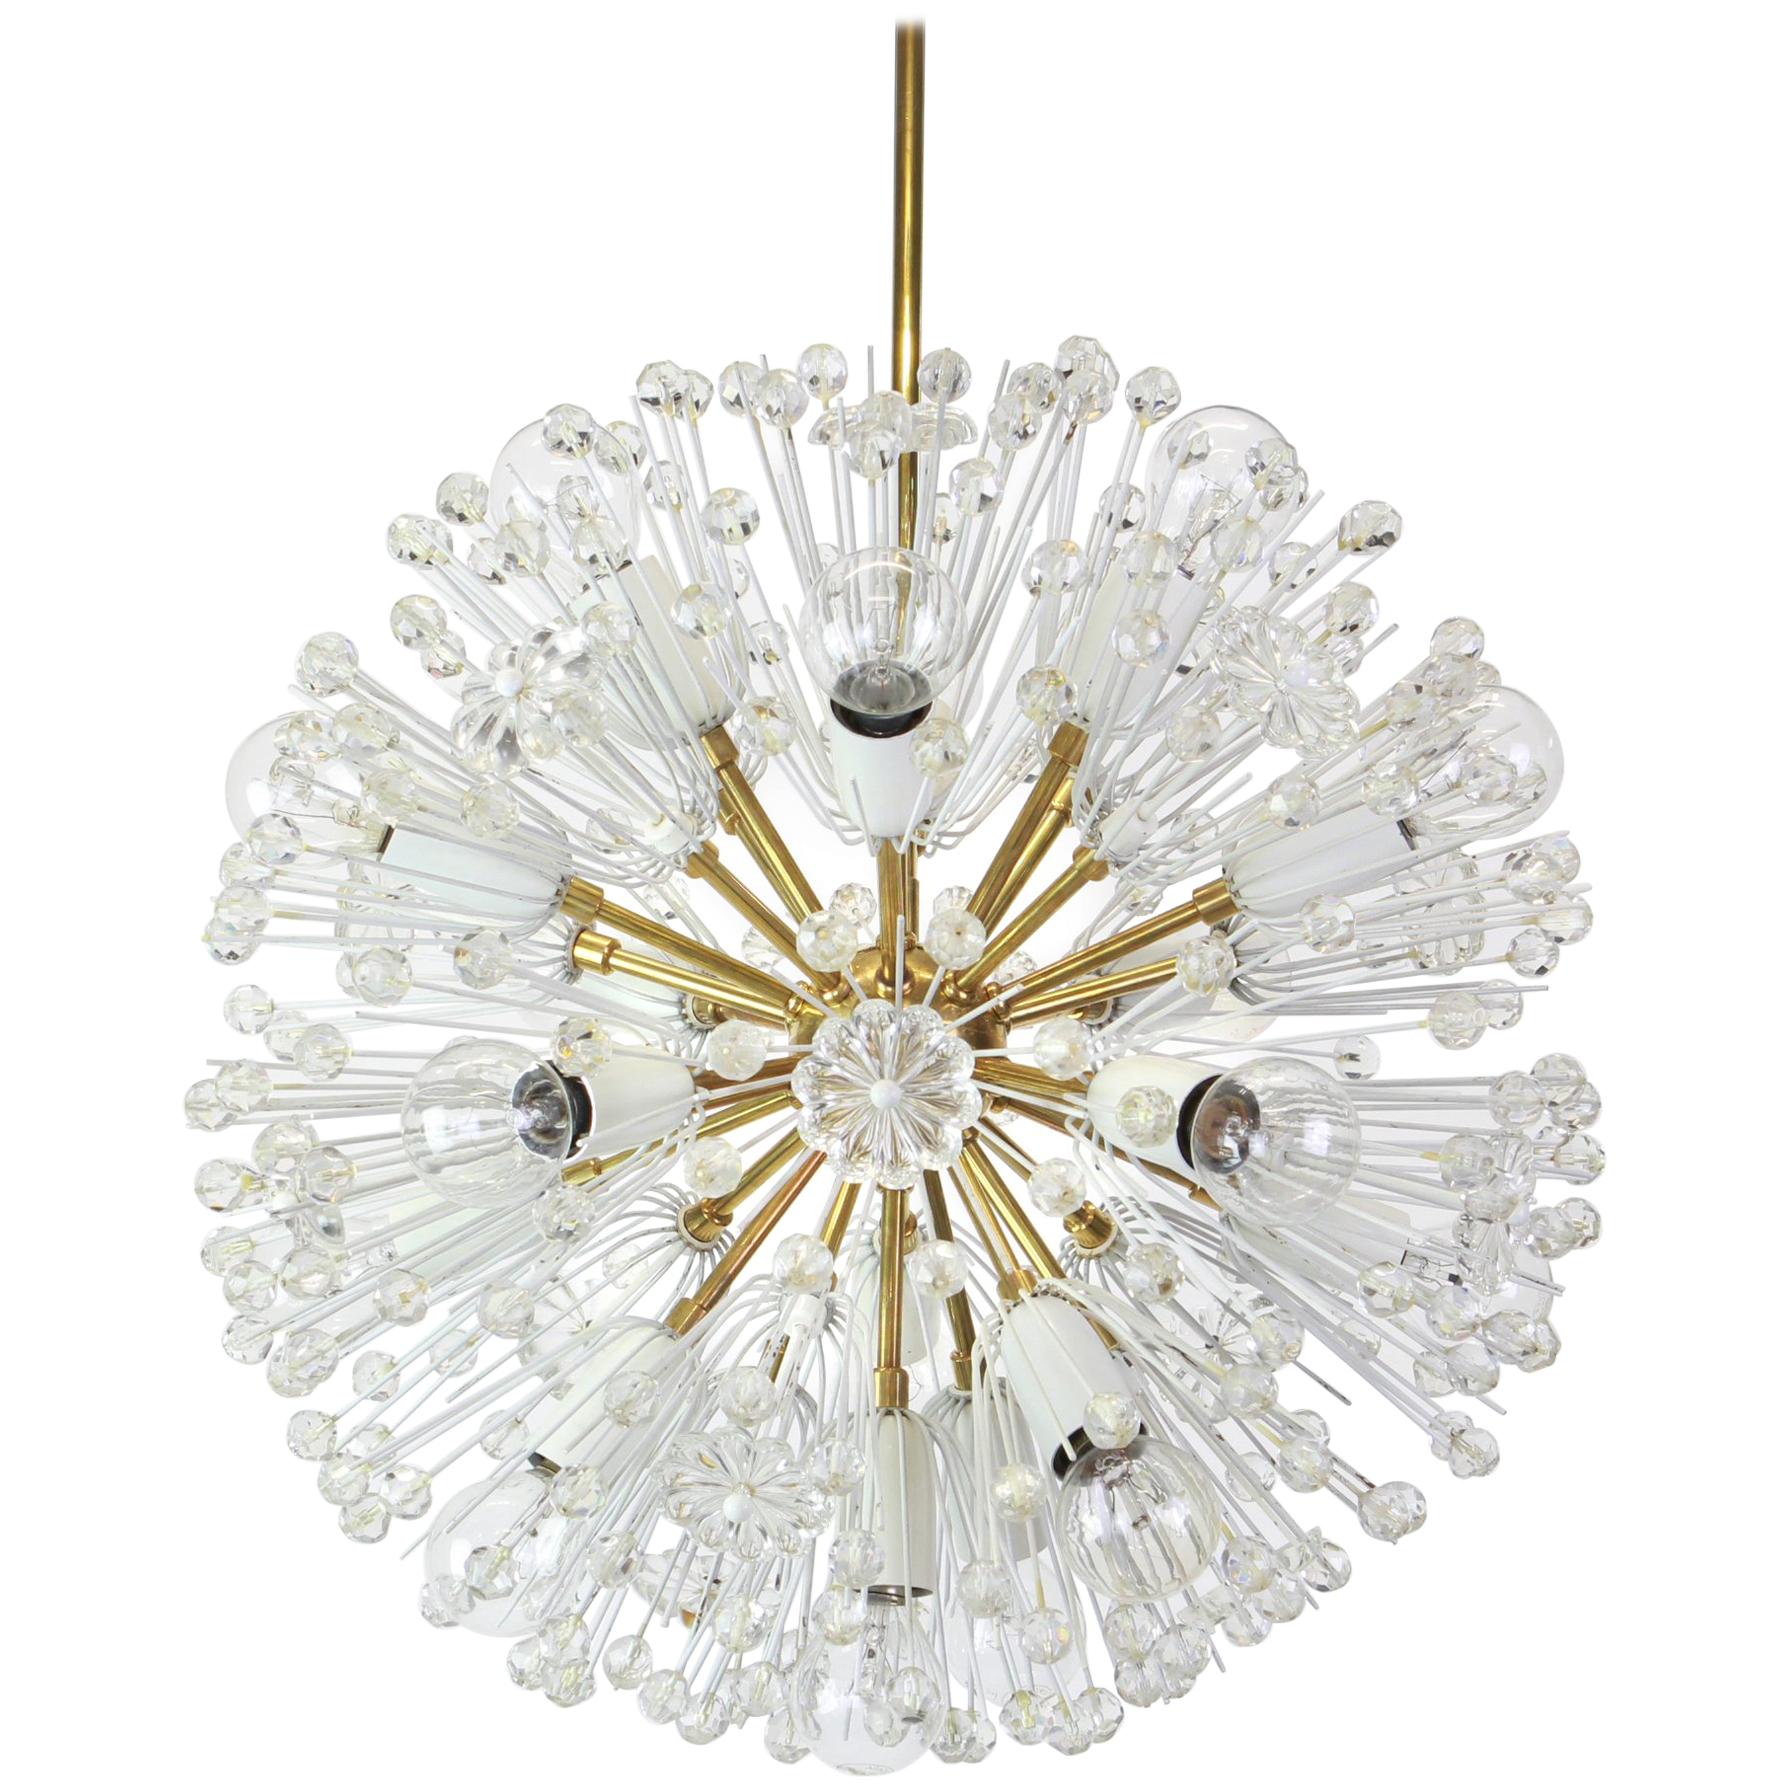 Beautiful large starburst brass chandelier with hundreds of crystals designed by Emil Stejnar for Nikoll, manufactured in Austria, circa 1960s.

Heavy quality and in good condition with small signs of age.
Cleaned, well-wired and ready to use.